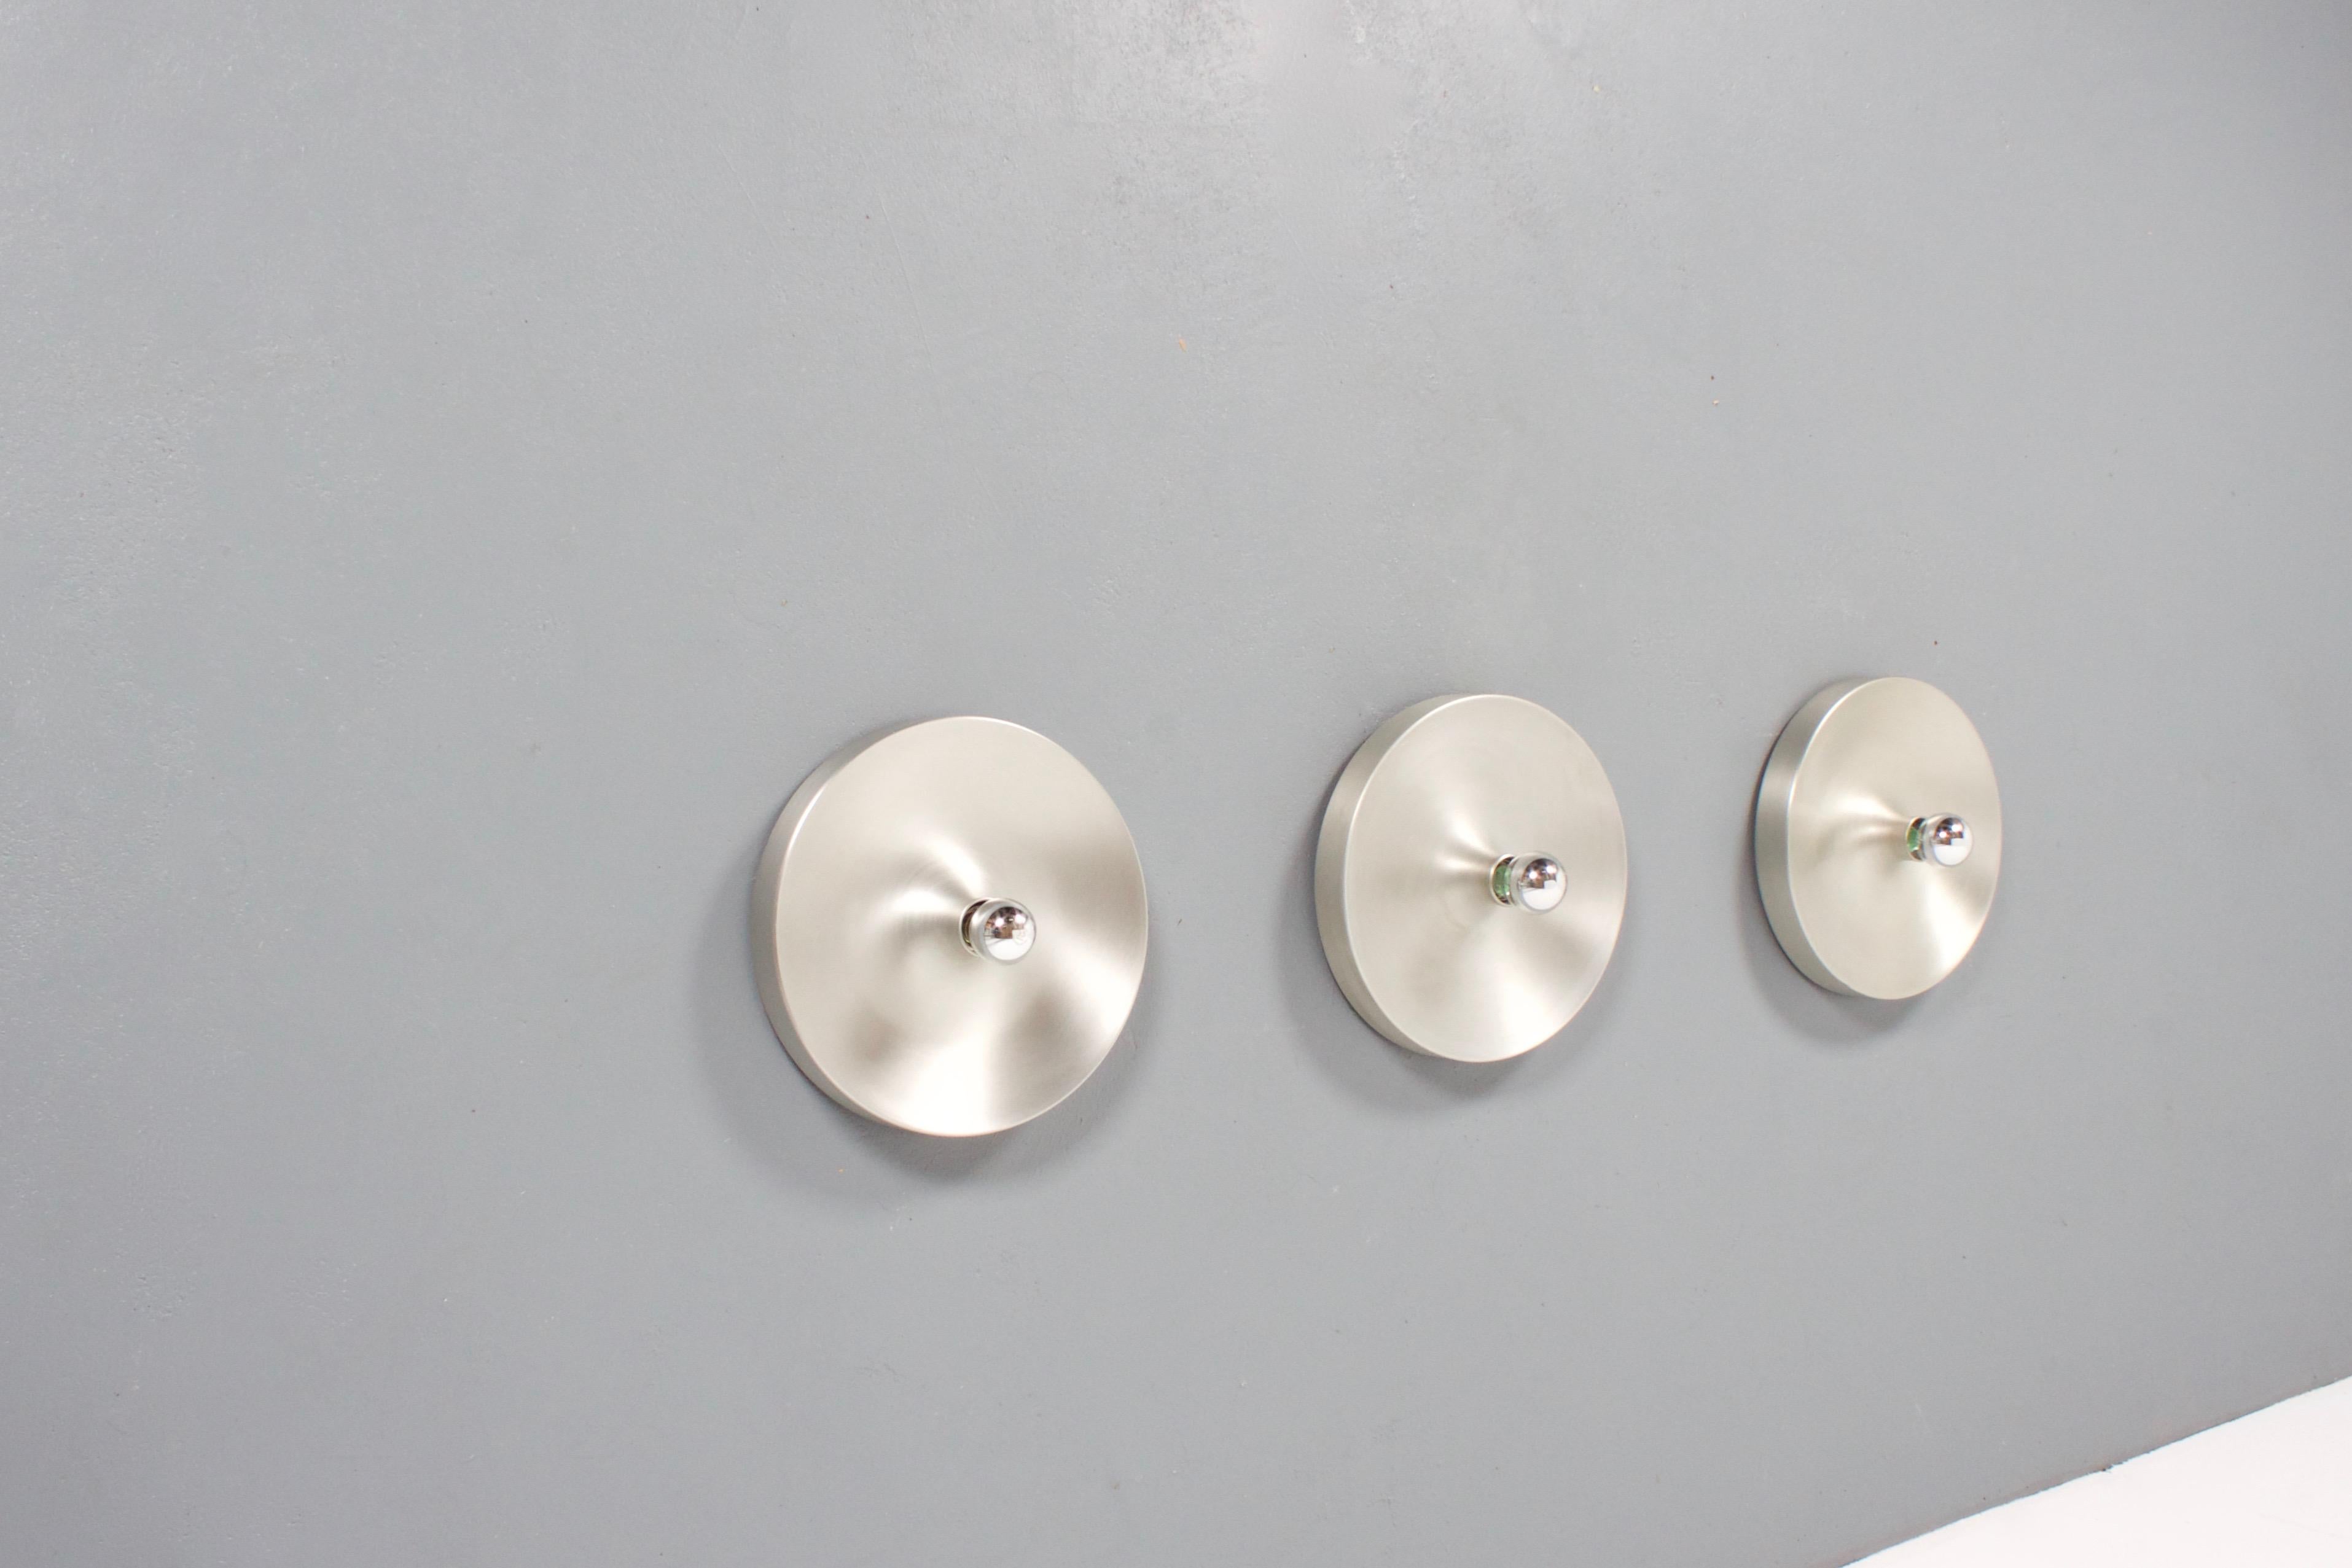 German 1/3 Modernist Aluminum Disc Wall Lights or Flush Mounts by Cosack, 1970s